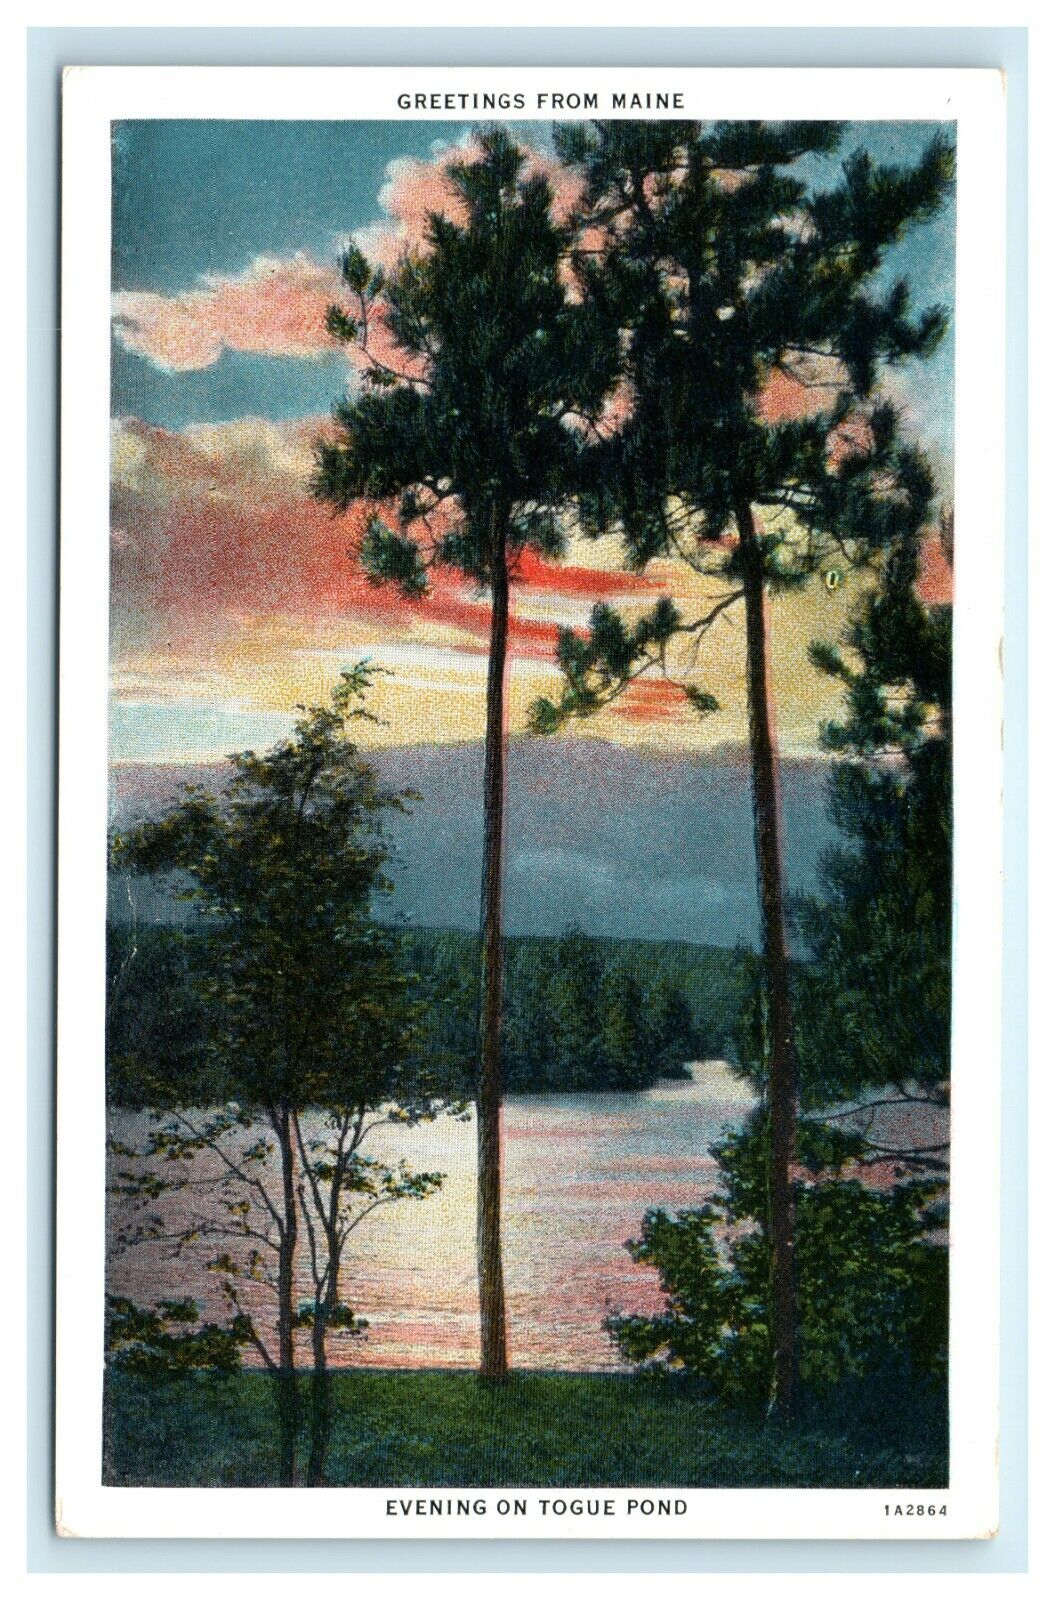 POSTCARD Greetings From Maine Evening on Togue Pond Tall Trees Sunset